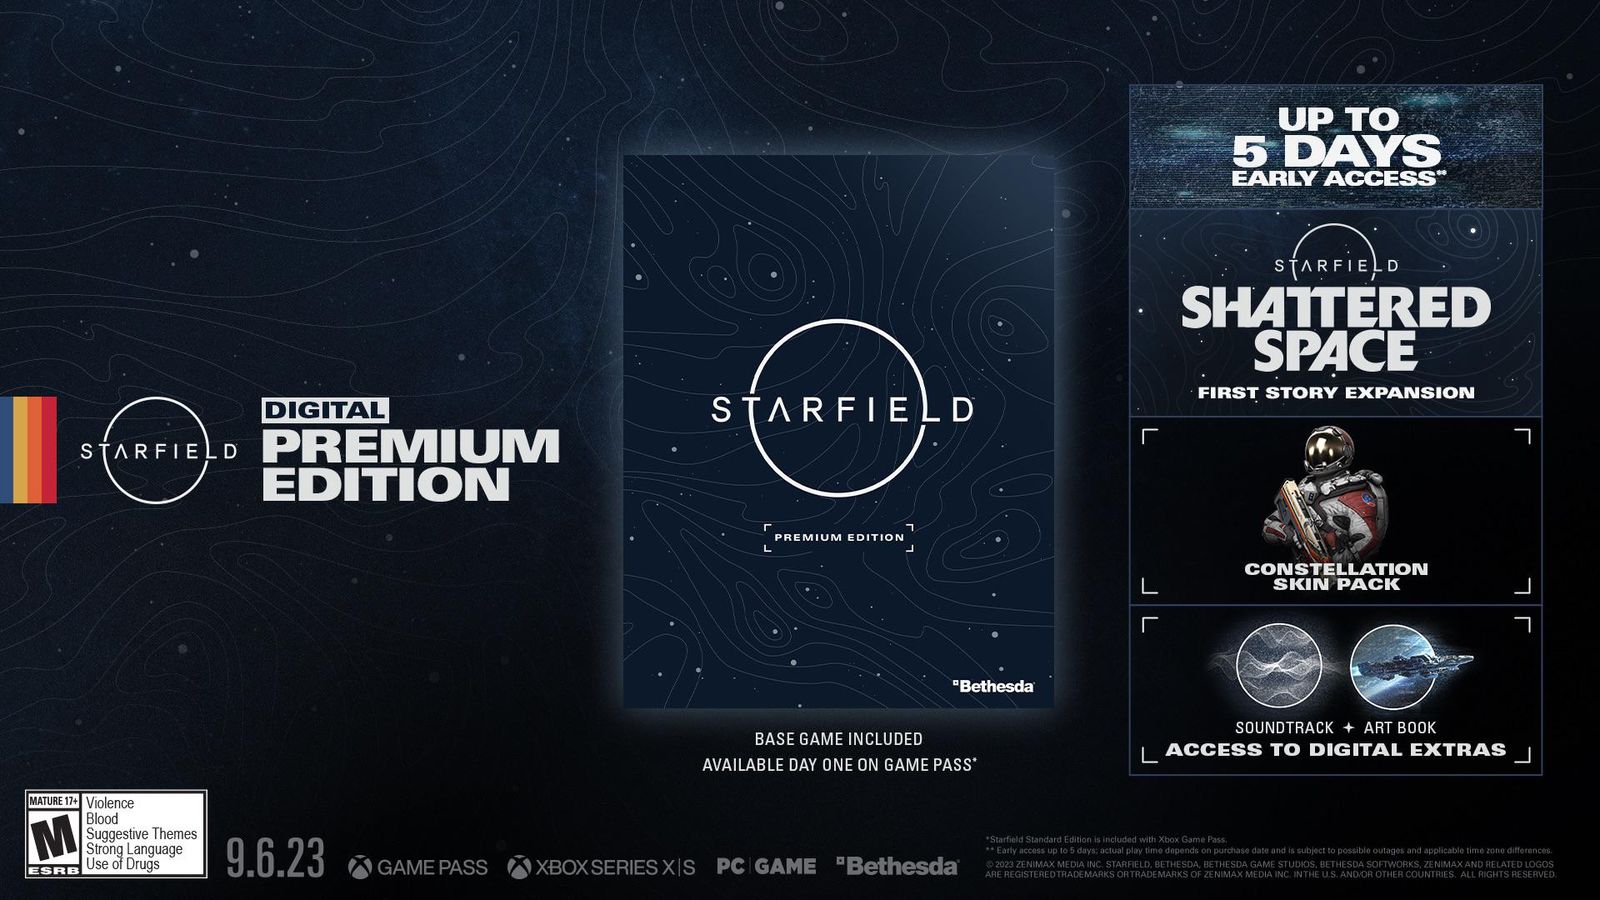 The Starfield Premium Edition with all its perks listed to the right